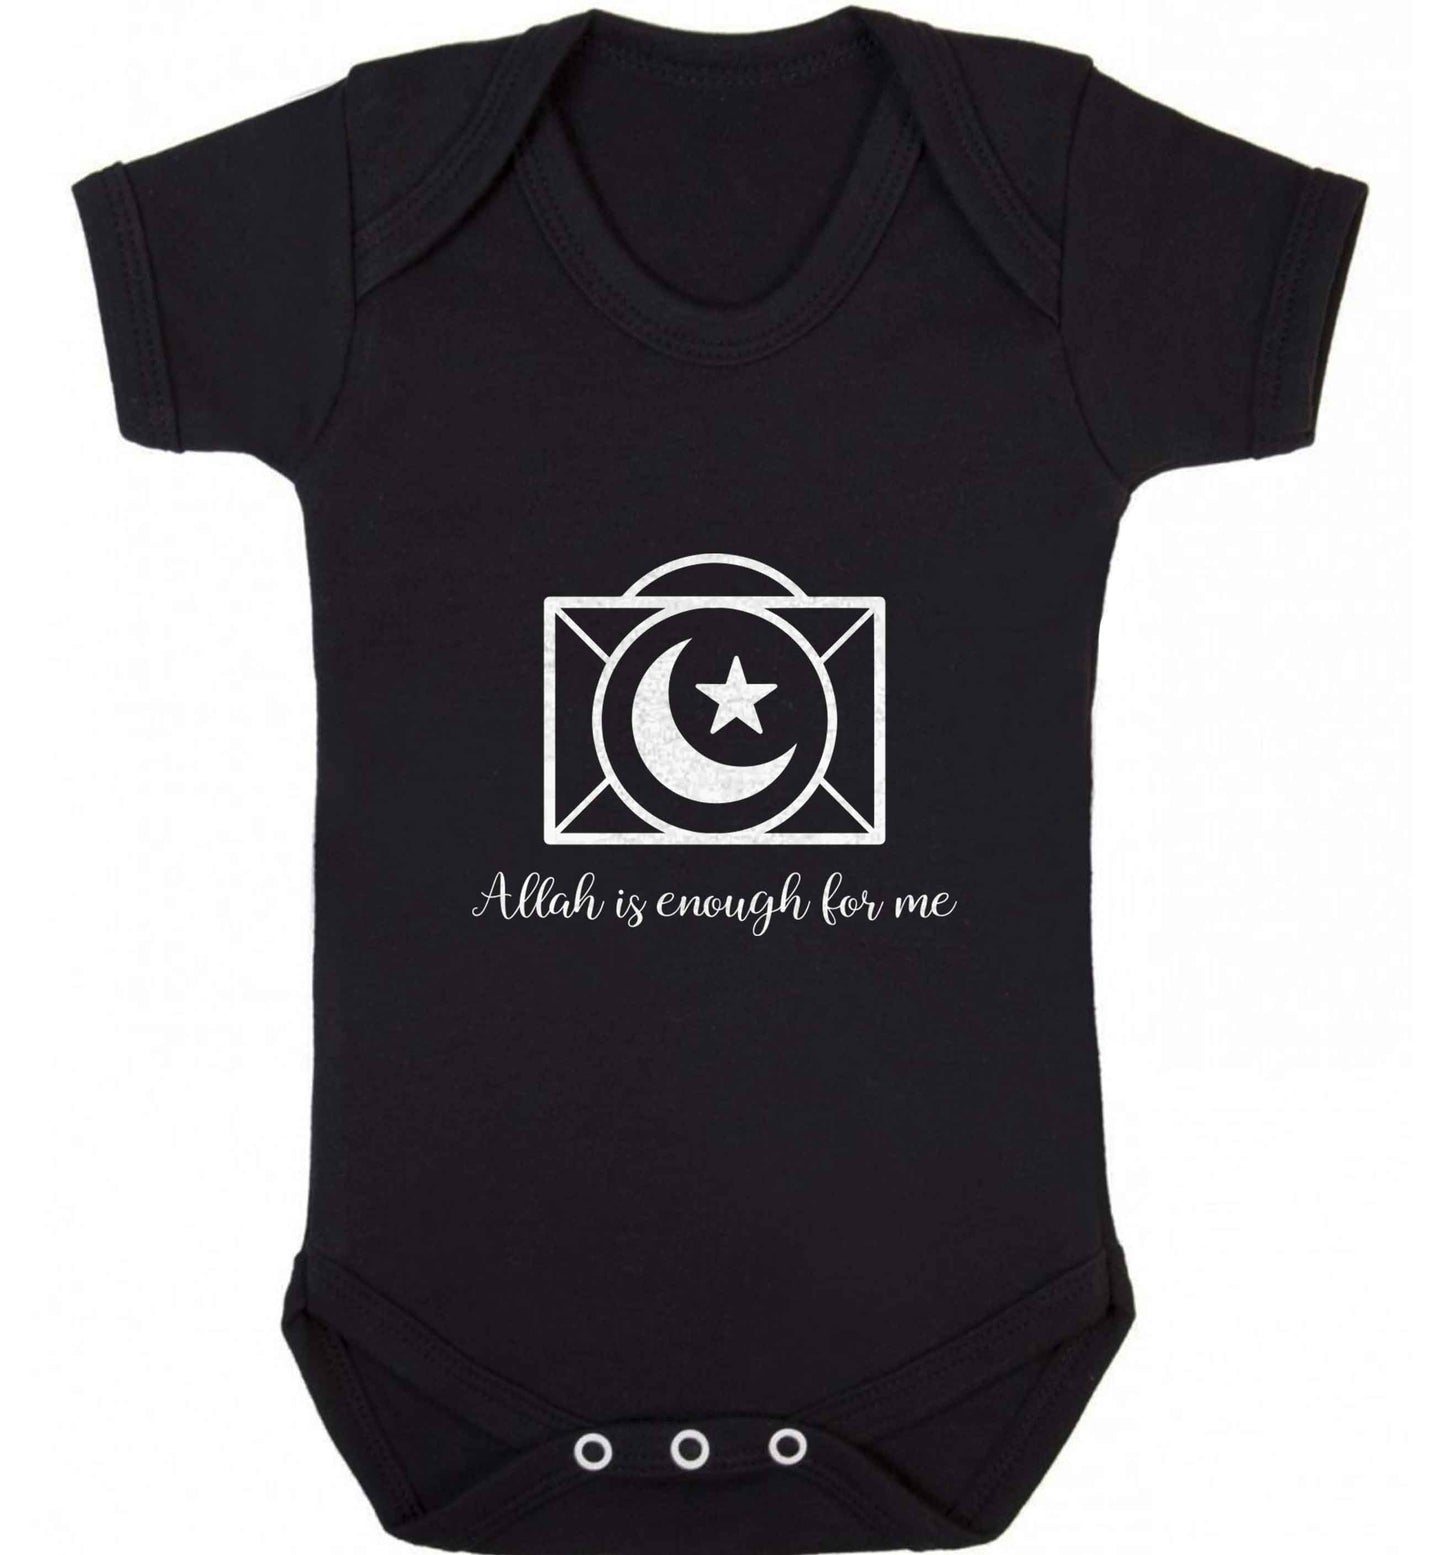 Allah is enough for me baby vest black 18-24 months